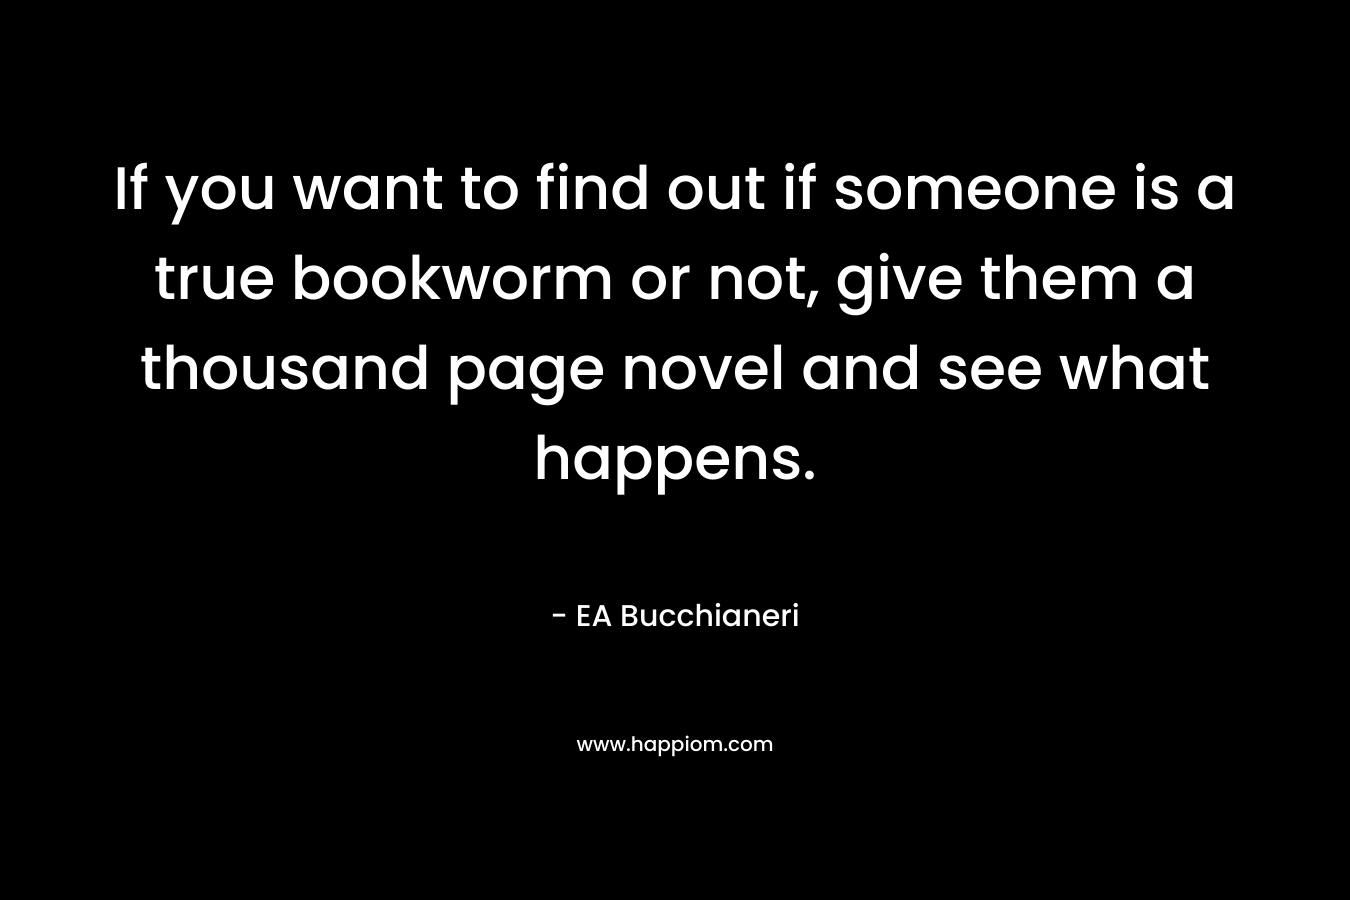 If you want to find out if someone is a true bookworm or not, give them a thousand page novel and see what happens.